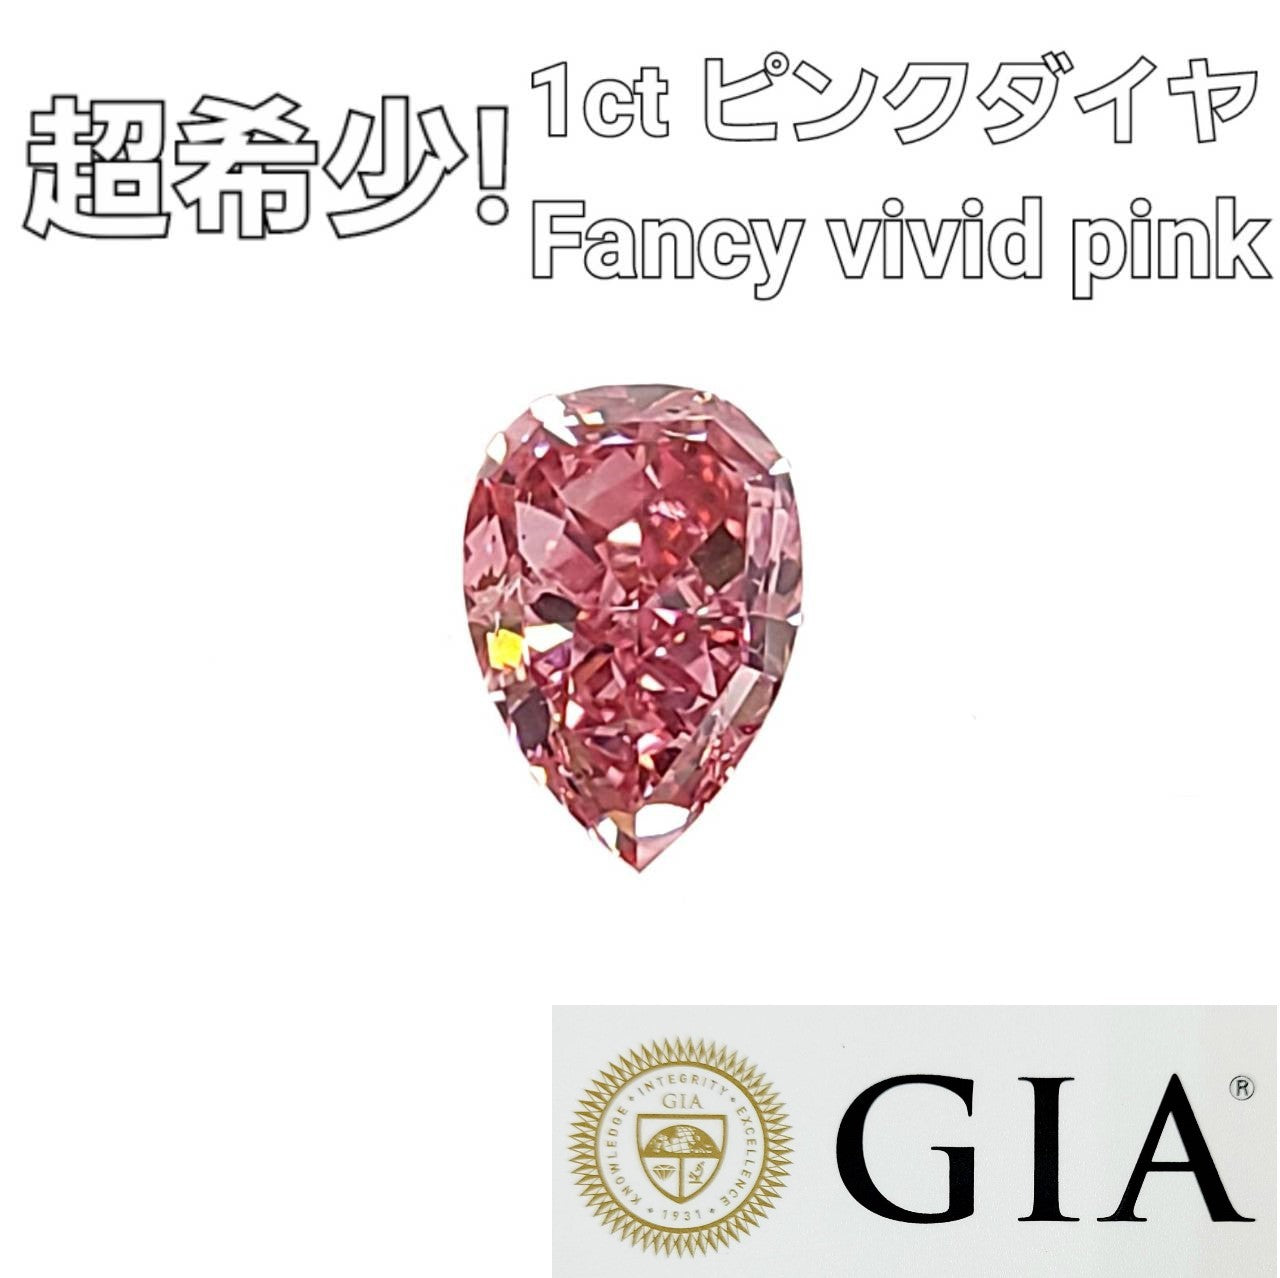 Ultra-rare! Fancy Vivid Pink 1.01ct Natural Diamond Loose Pear Shape with GIA Certificate